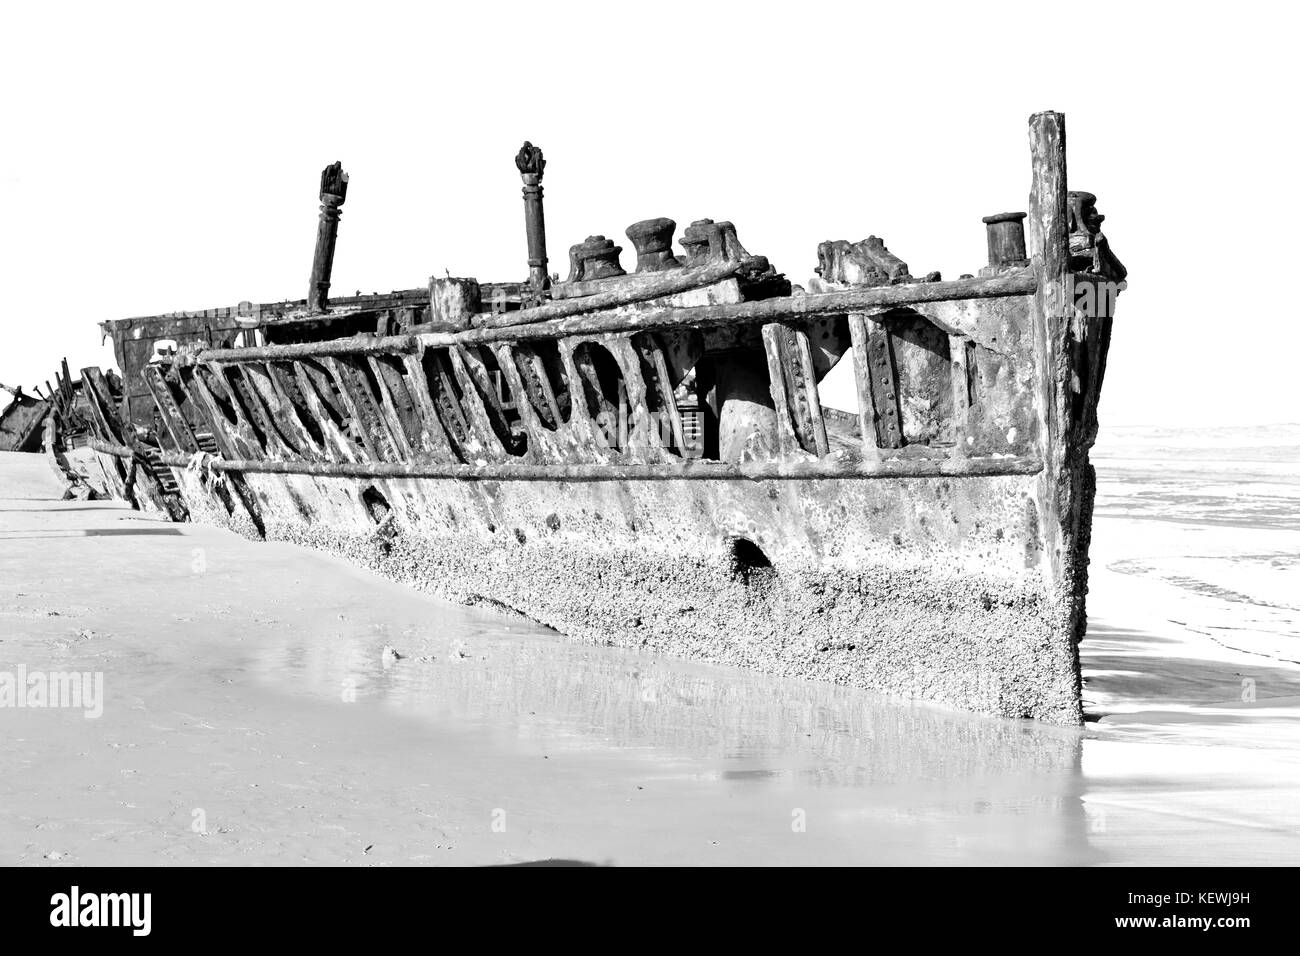 in australia fraser island the antique rusty and damagede boat and  corrosion in the ocean sea Stock Photo